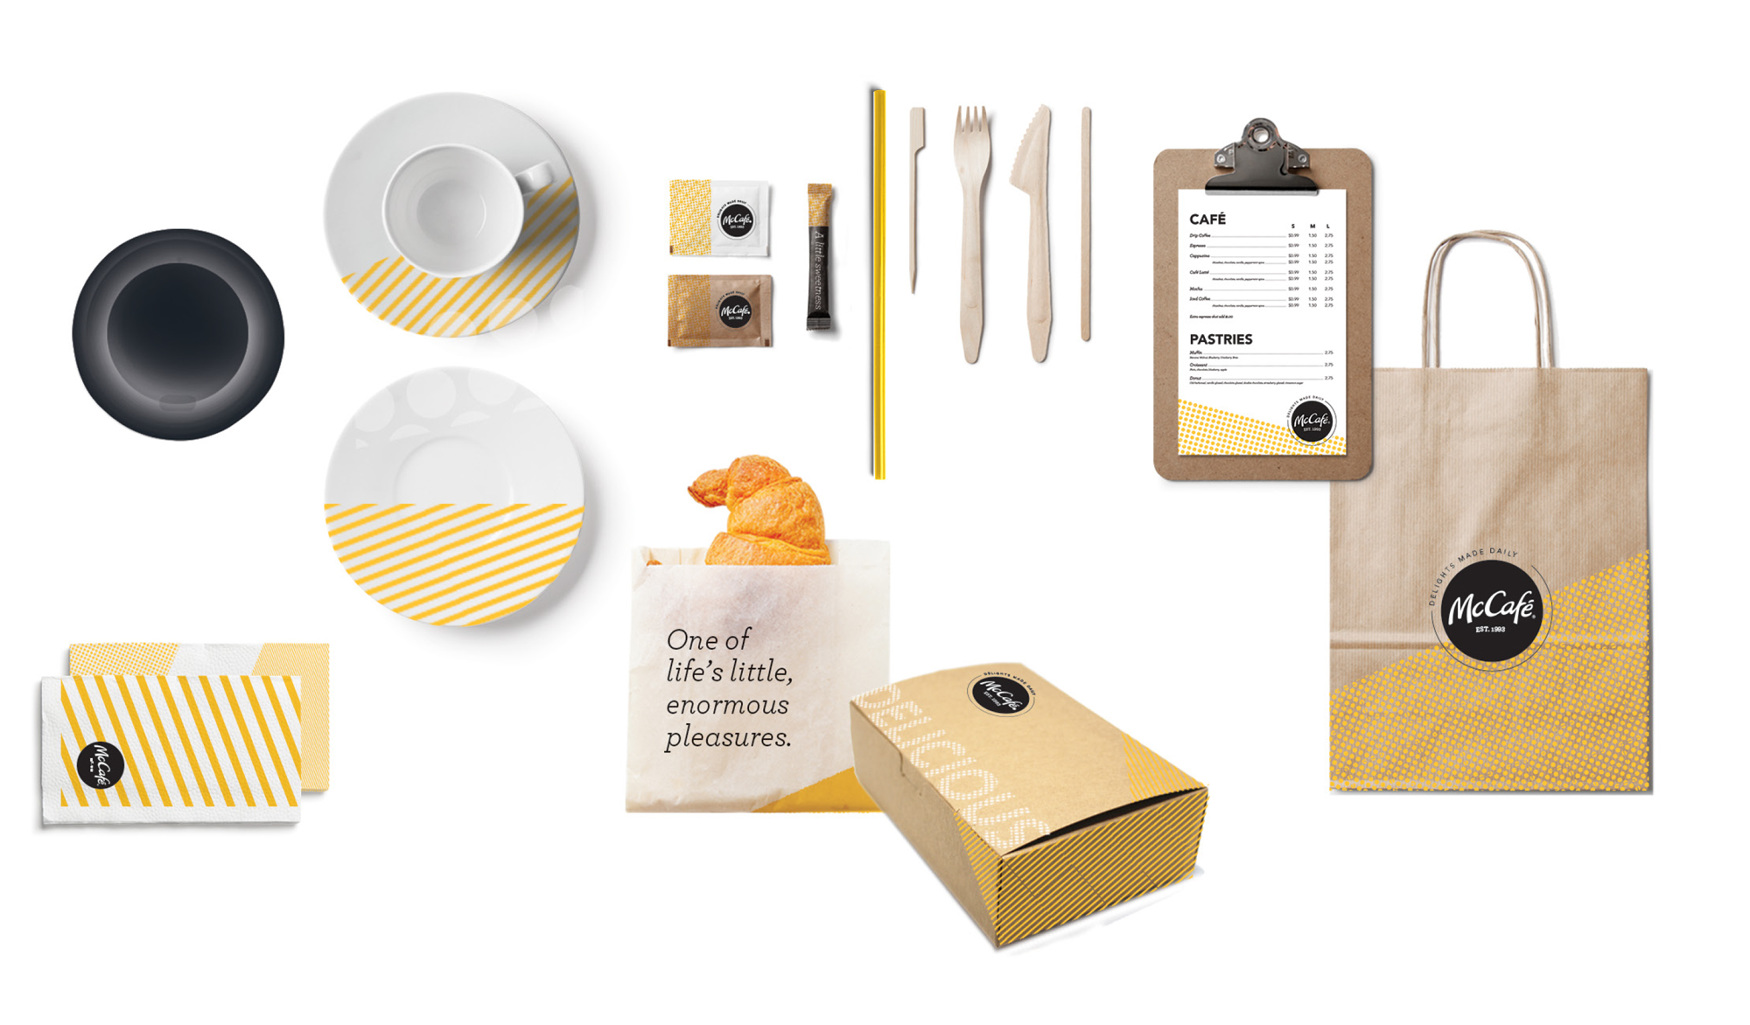  I had a lot of fun making the the full packaging suite for this - everything from napkins to coffee carriers. The goal was to keep it fresh, modern and in line with McDonald's current global packaging, but still familiar to longtime customers by mak